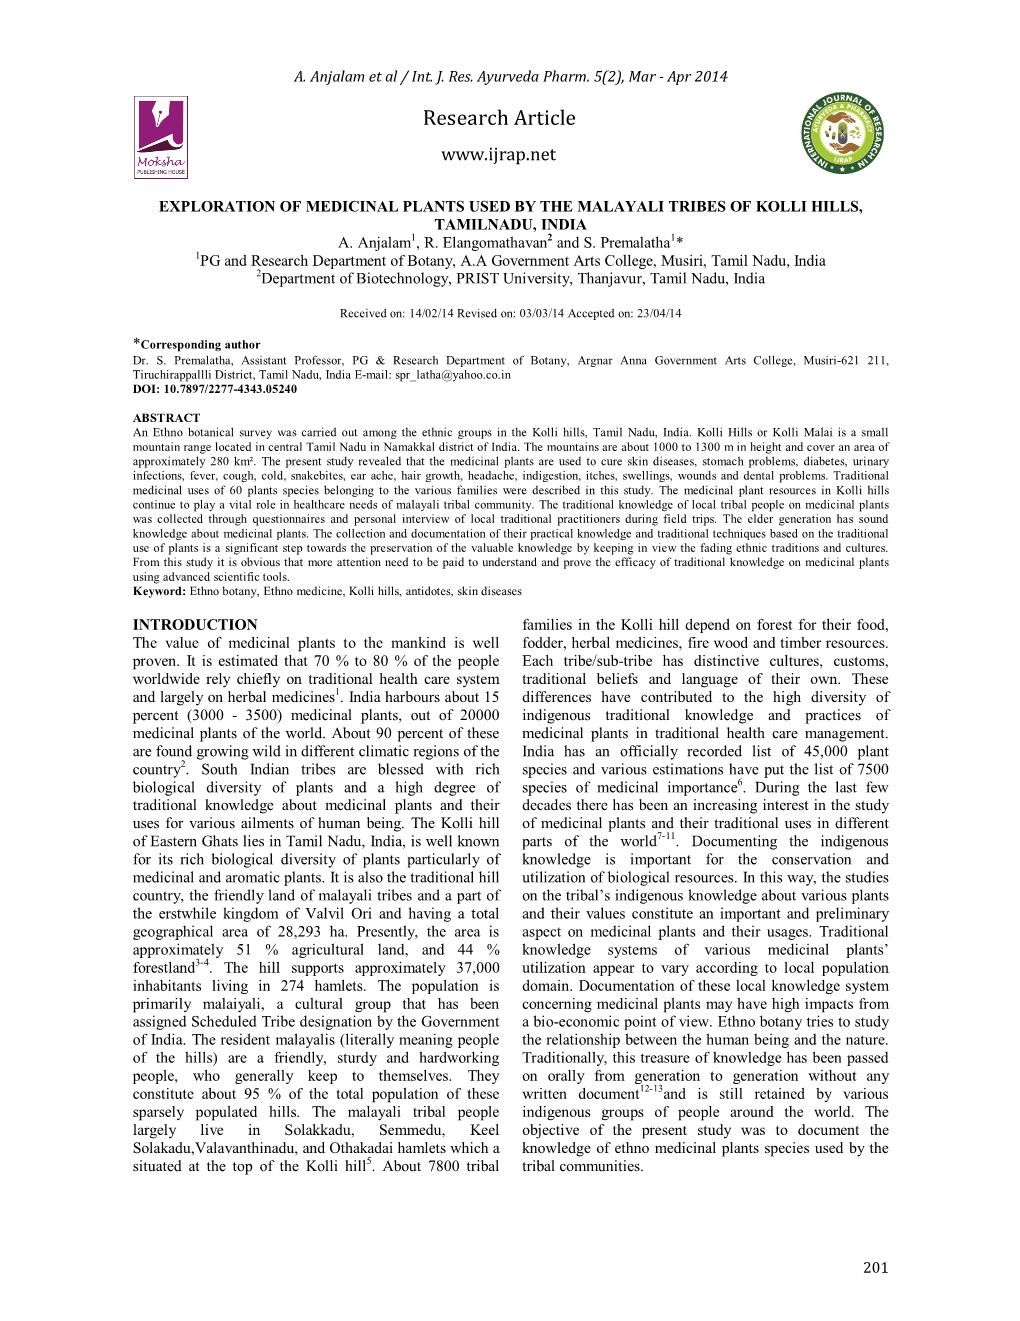 Exploration of Medicinal Plants Used by the Malayali Tribes of Kolli Hills, Tamilnadu, India A